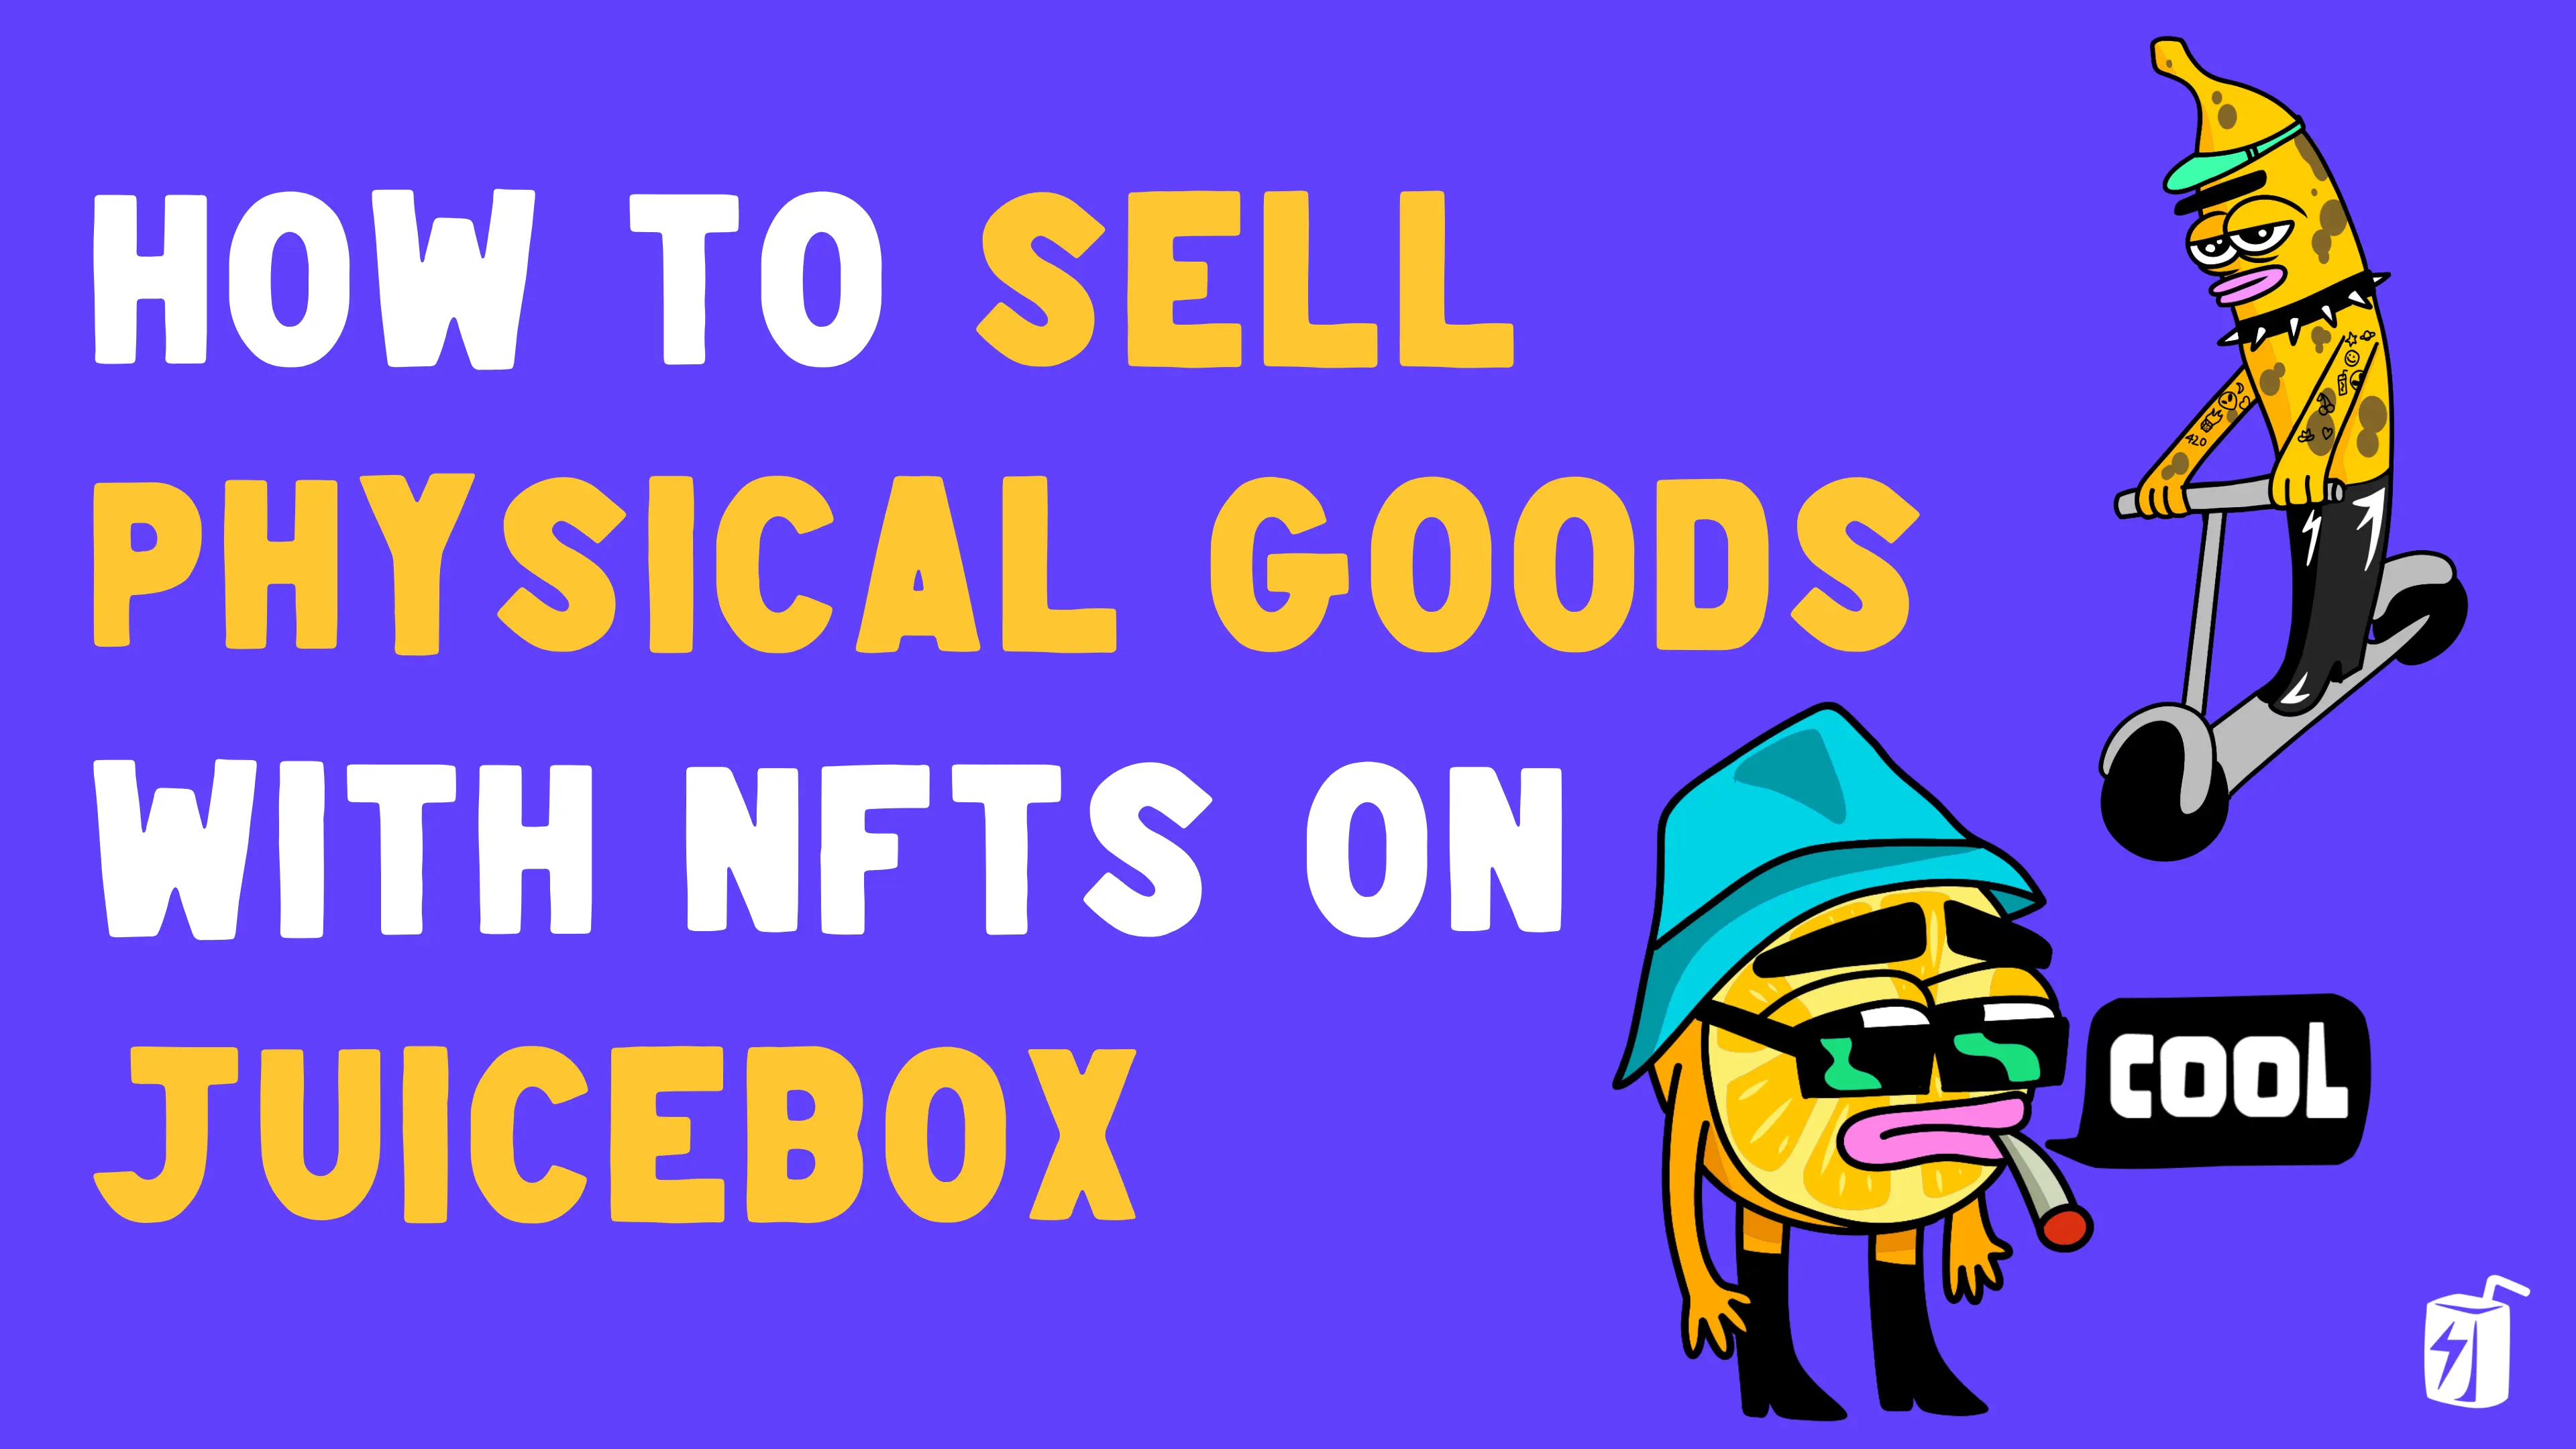 How to sell physical goods with NFTs on Juicebox